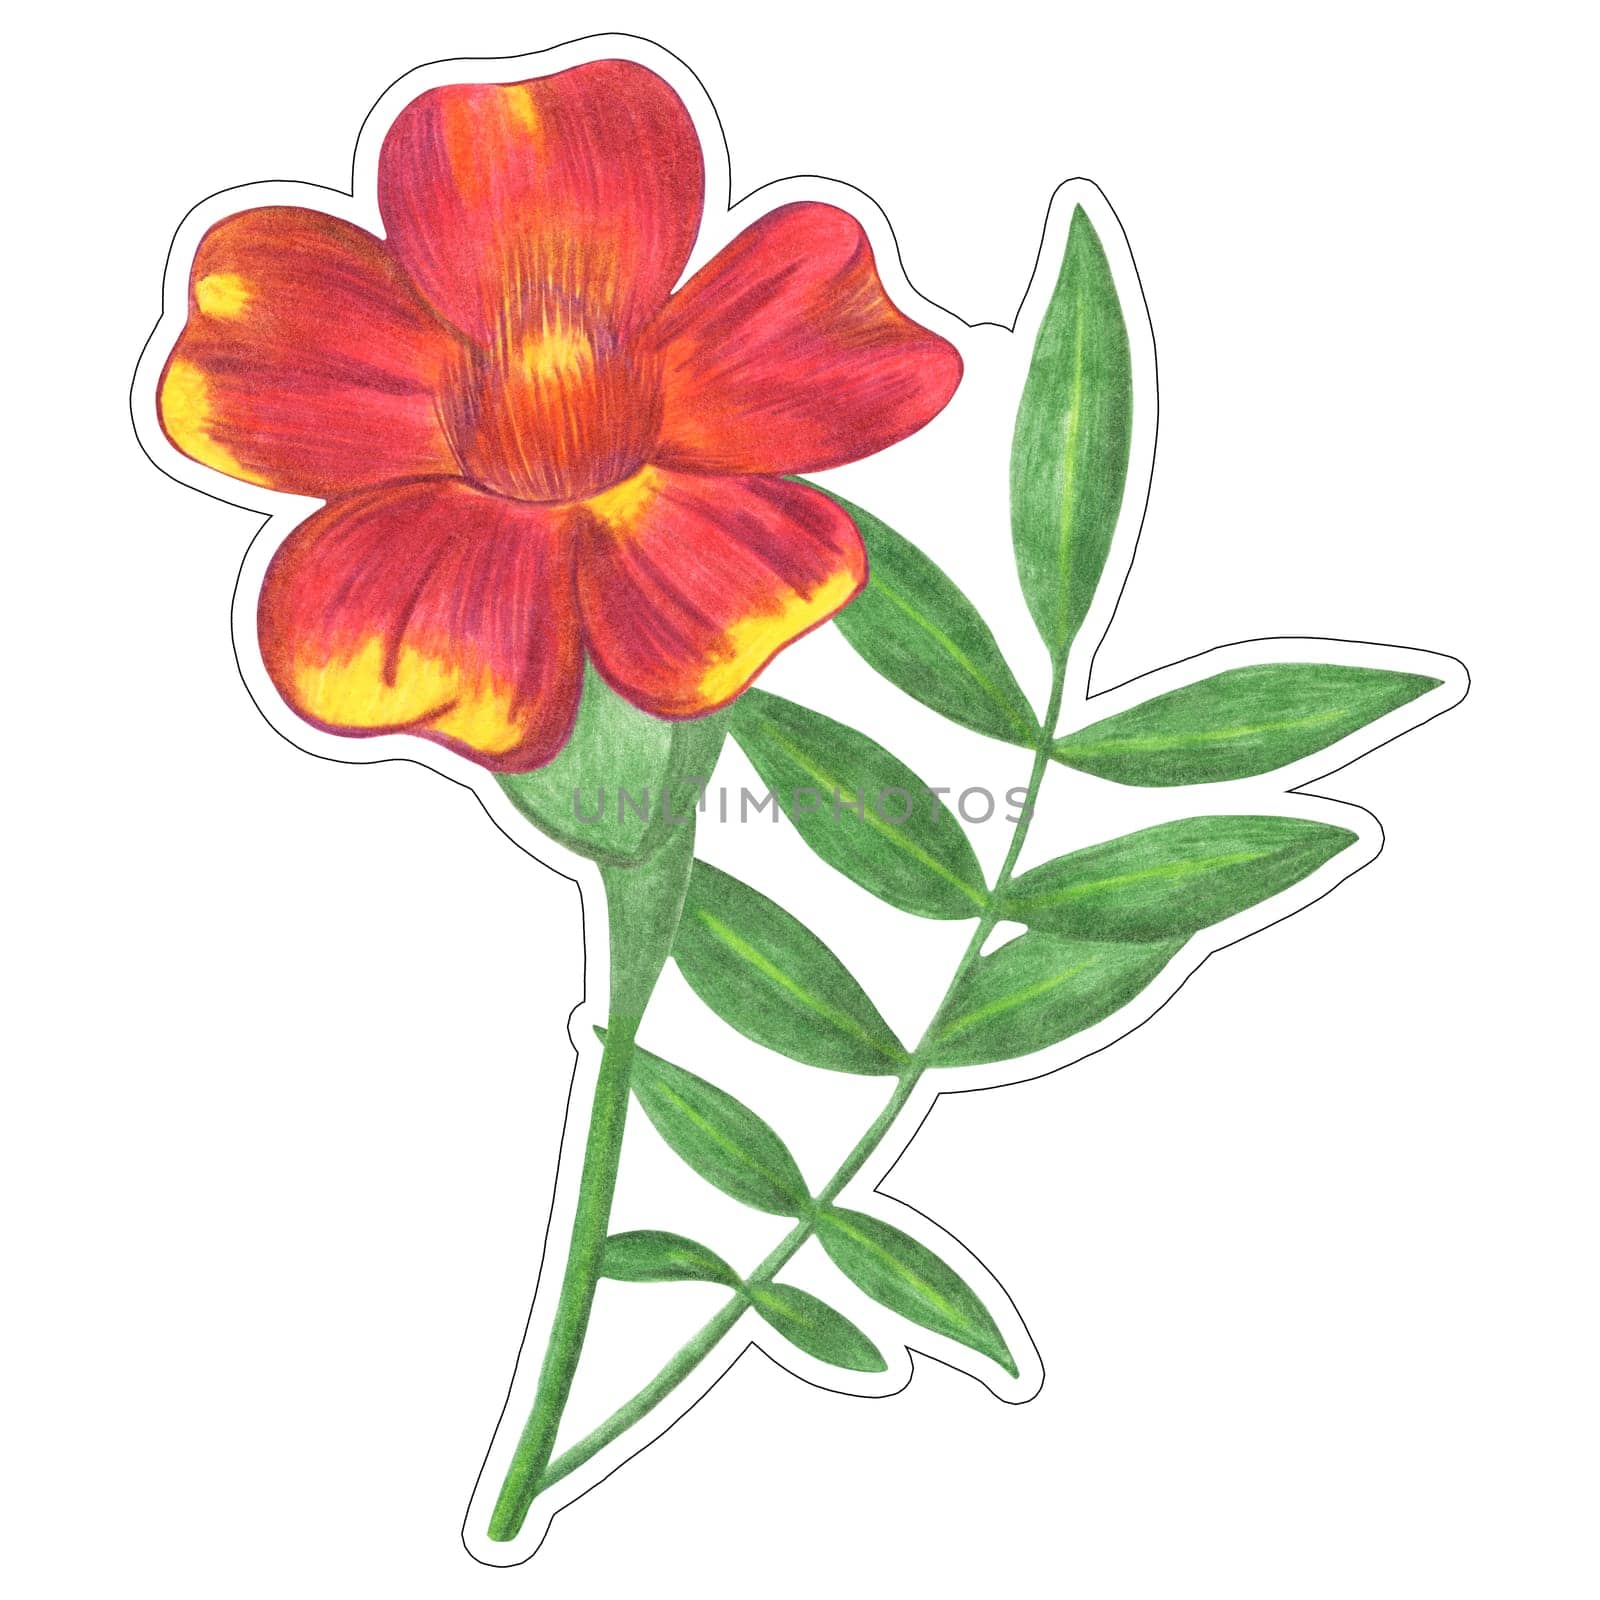 Red Marigold with Green Leaves Sticker Isolated on White Background. Marigold Flower Element Drawn by Colored Pencil.